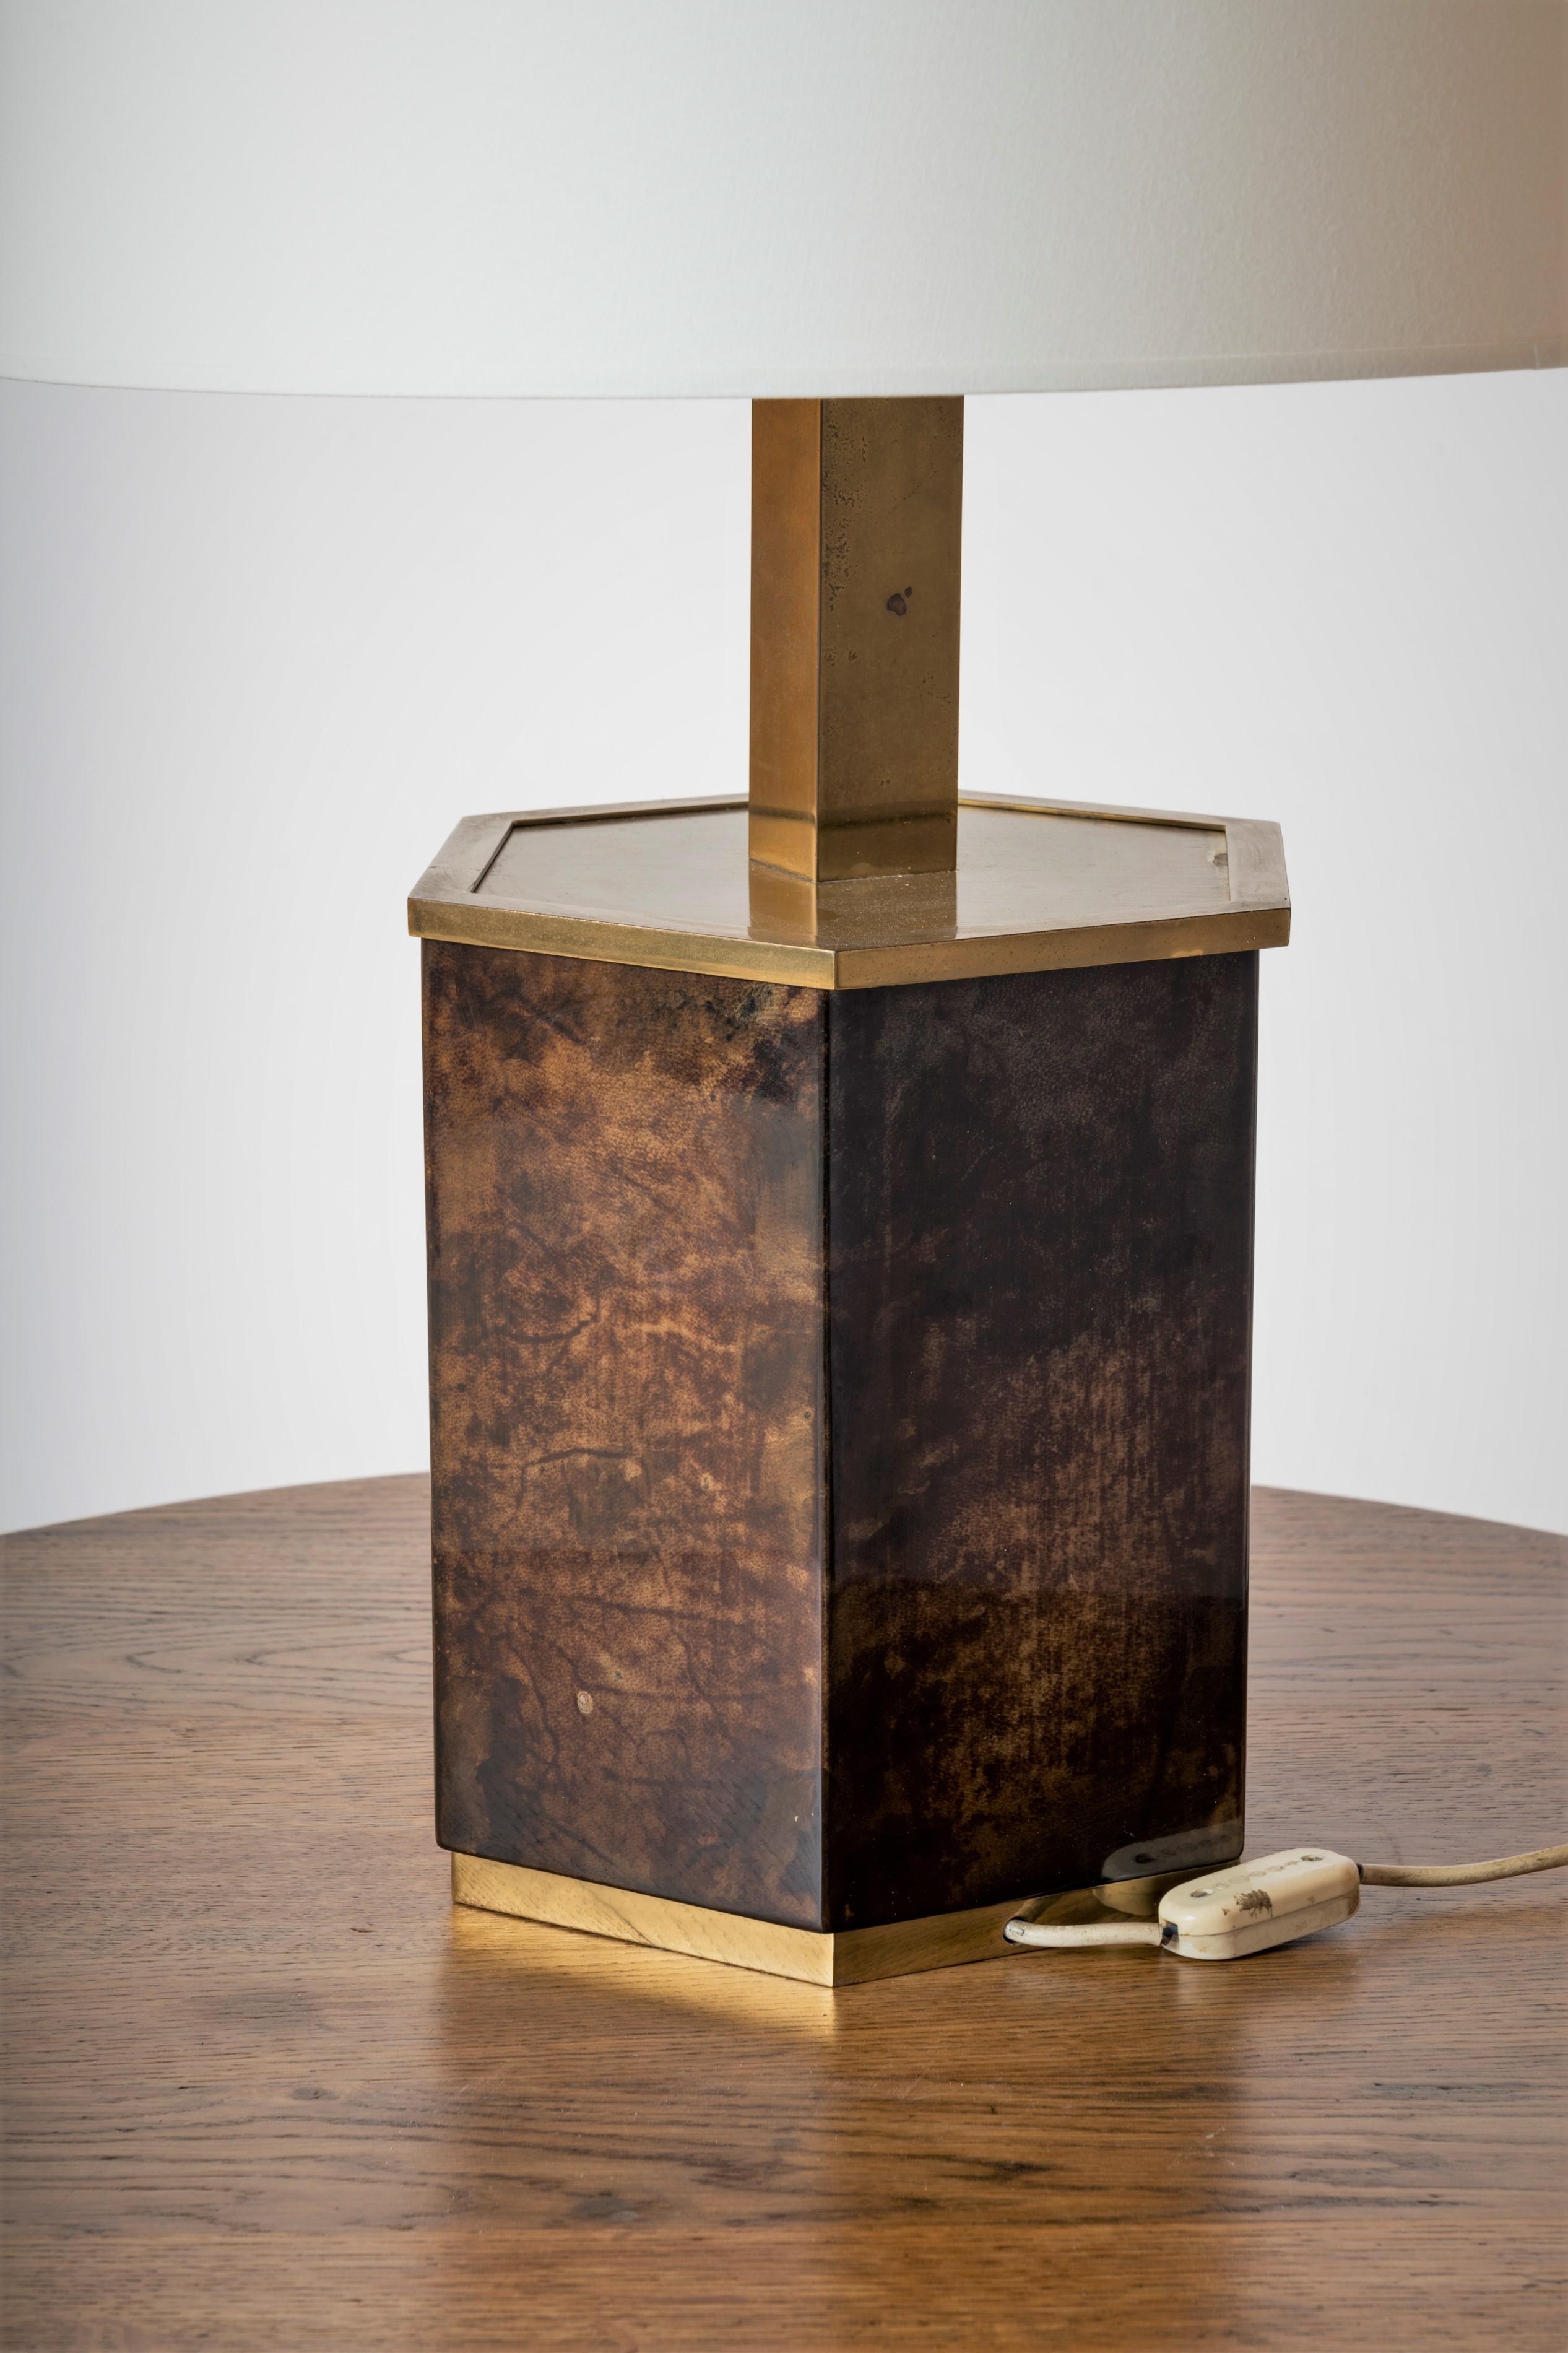 Elegant goatskin lamp by Aldo Tura with brass finishes. The deep brown nuances of the velum are a perfect match with the patinated brass trimmings.
European socket and wiring. Needs rewiring.
In good vintage condition.
This lamp will ship from